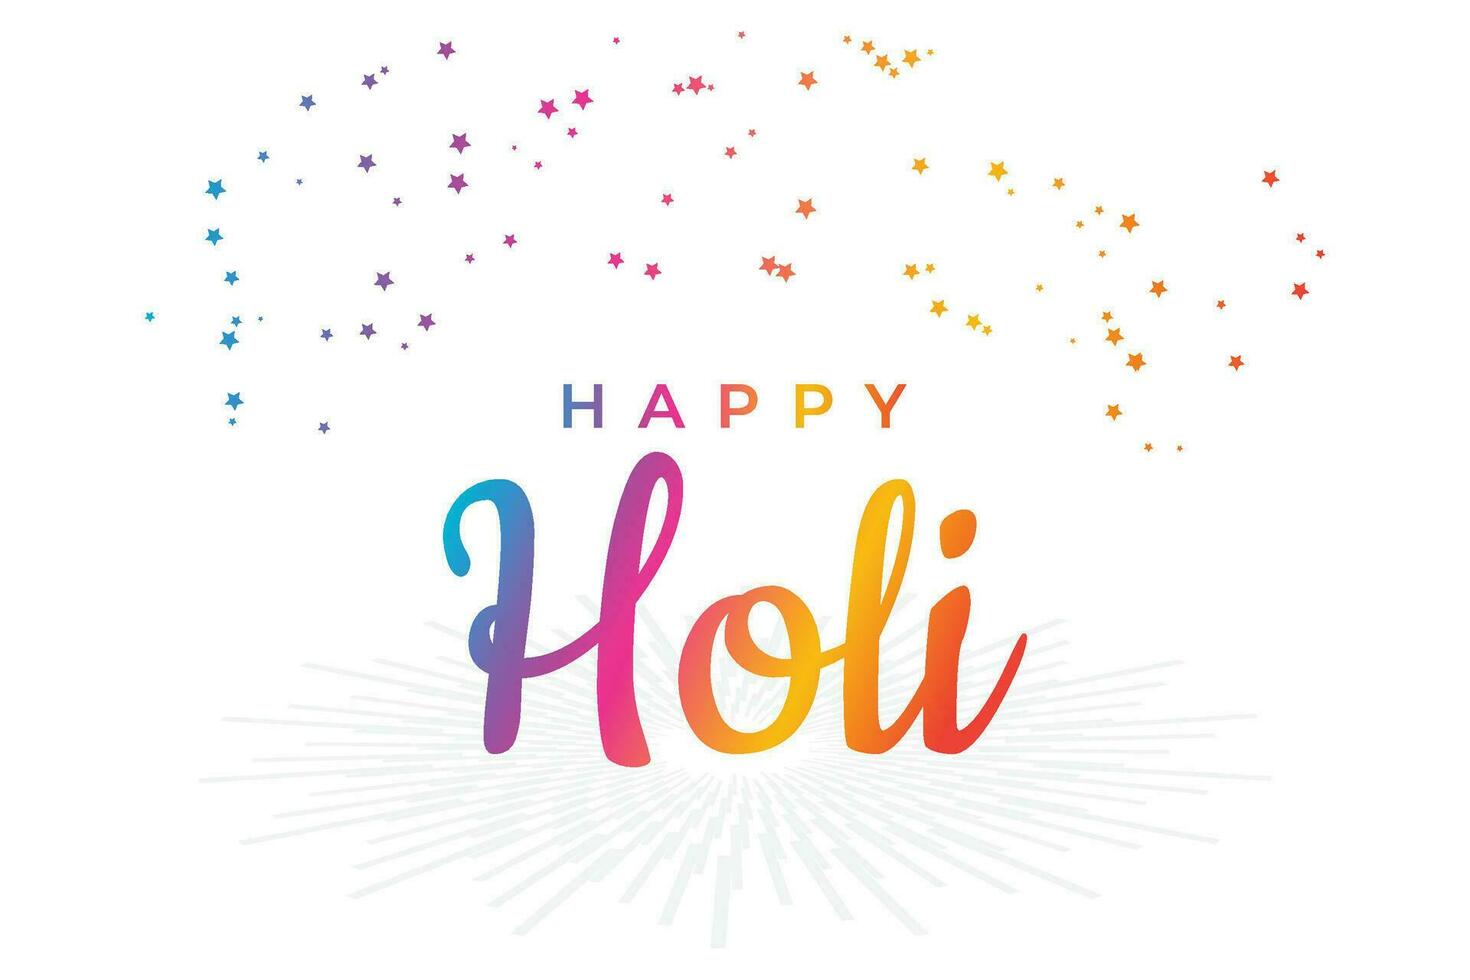 Happy holi text with colorful paint splash dust and spray vector